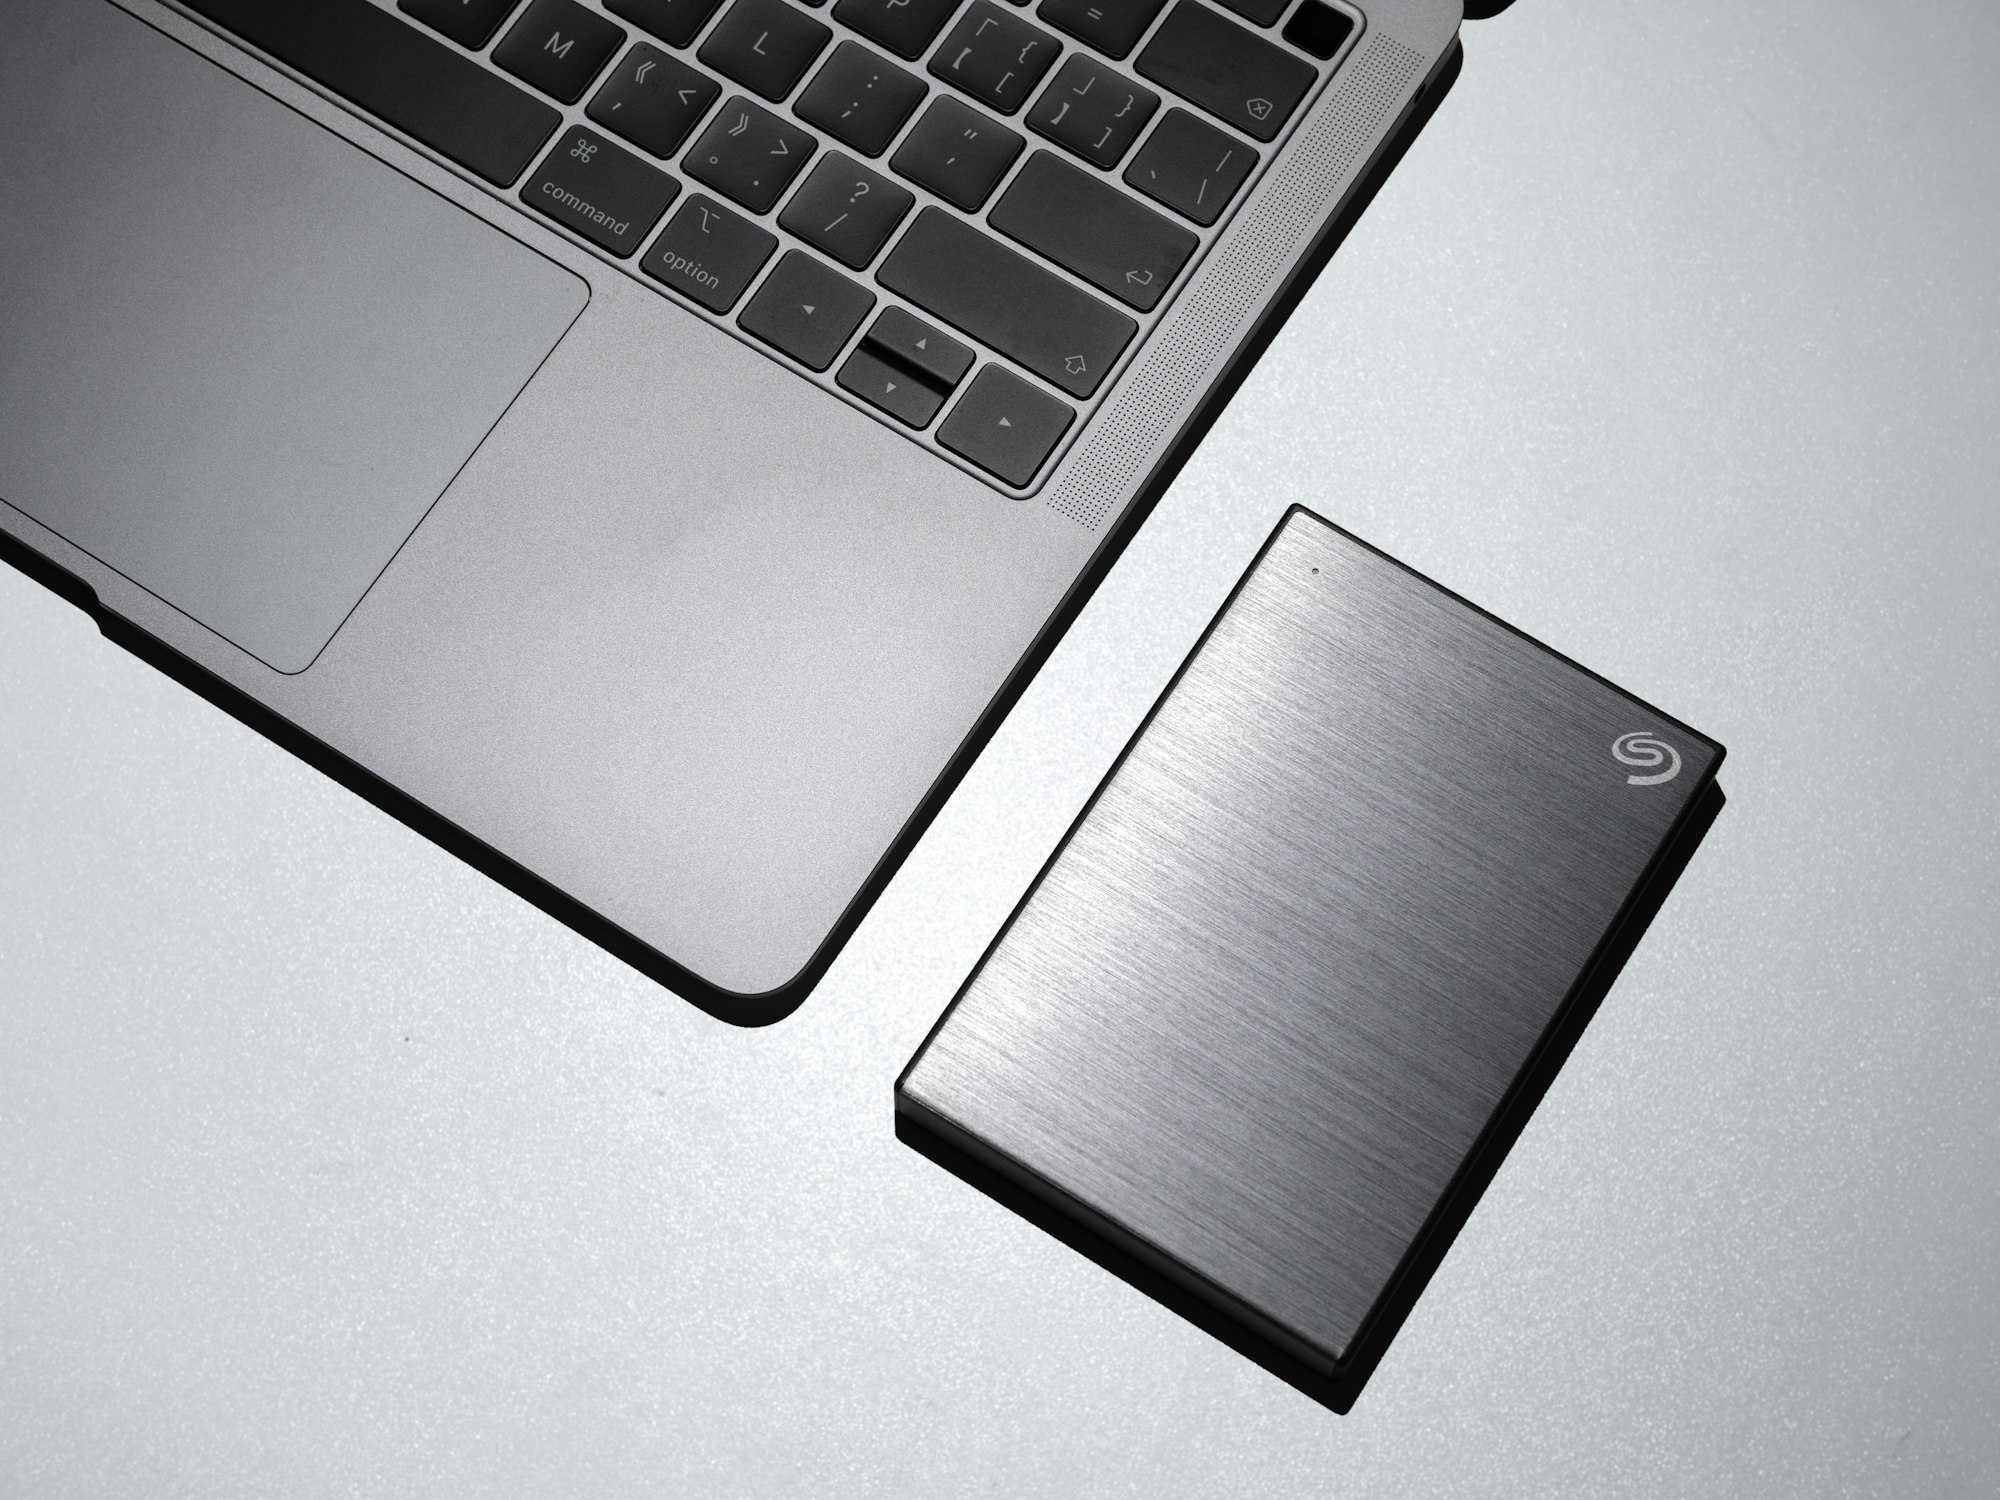 An external hard drive with a brushed stainless steel case.